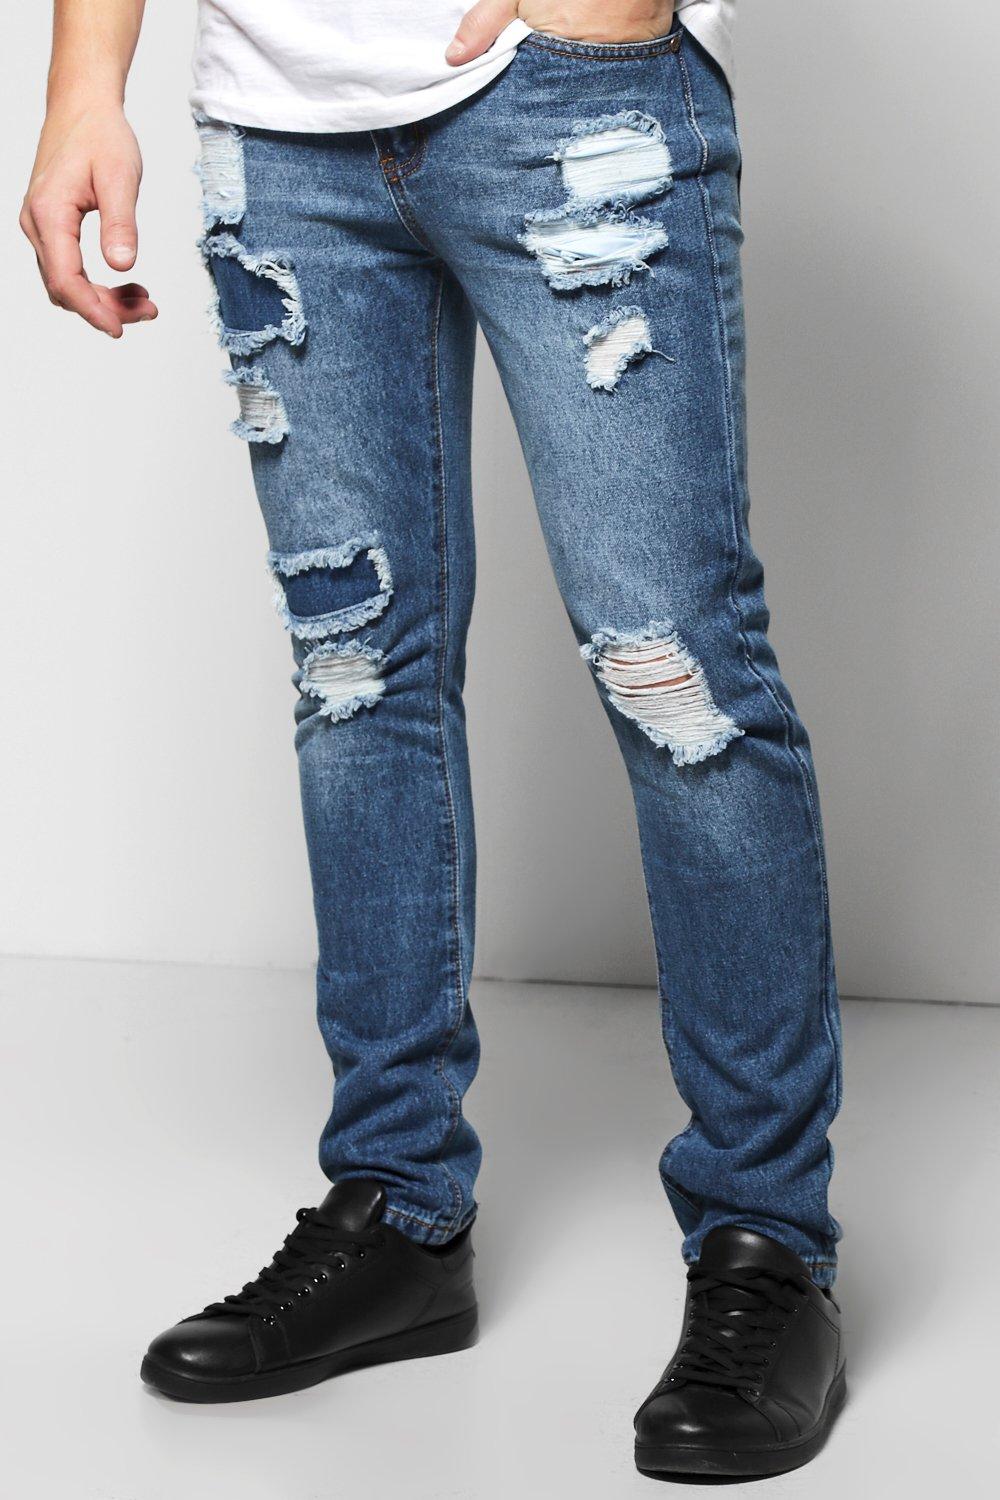 mens repaired jeans